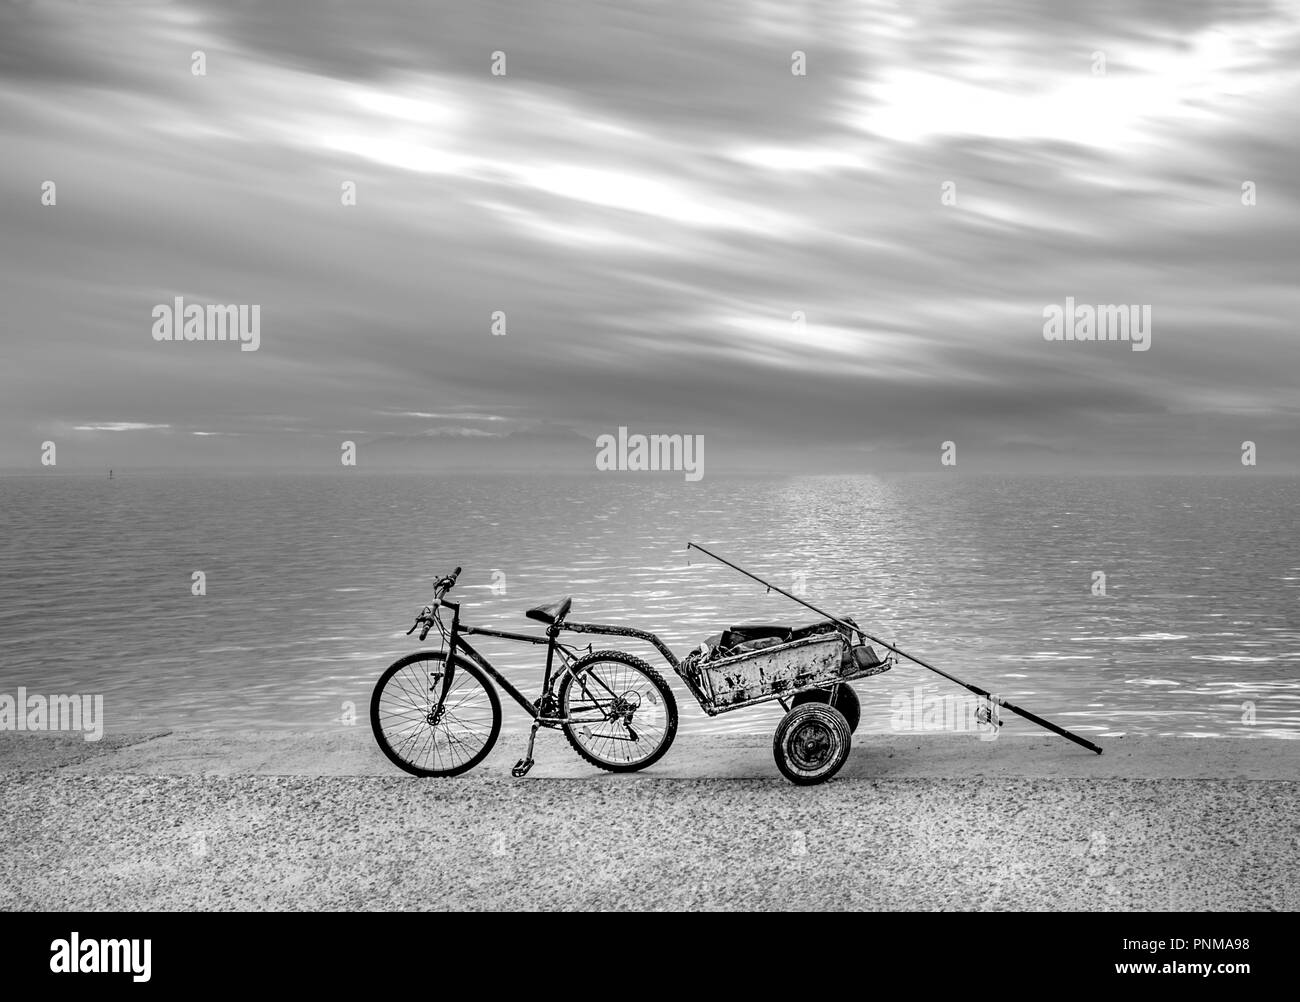 Fisherman's bicycle with trailer on seafront under a dramatic sky. Thessaloniki, Greece Stock Photo